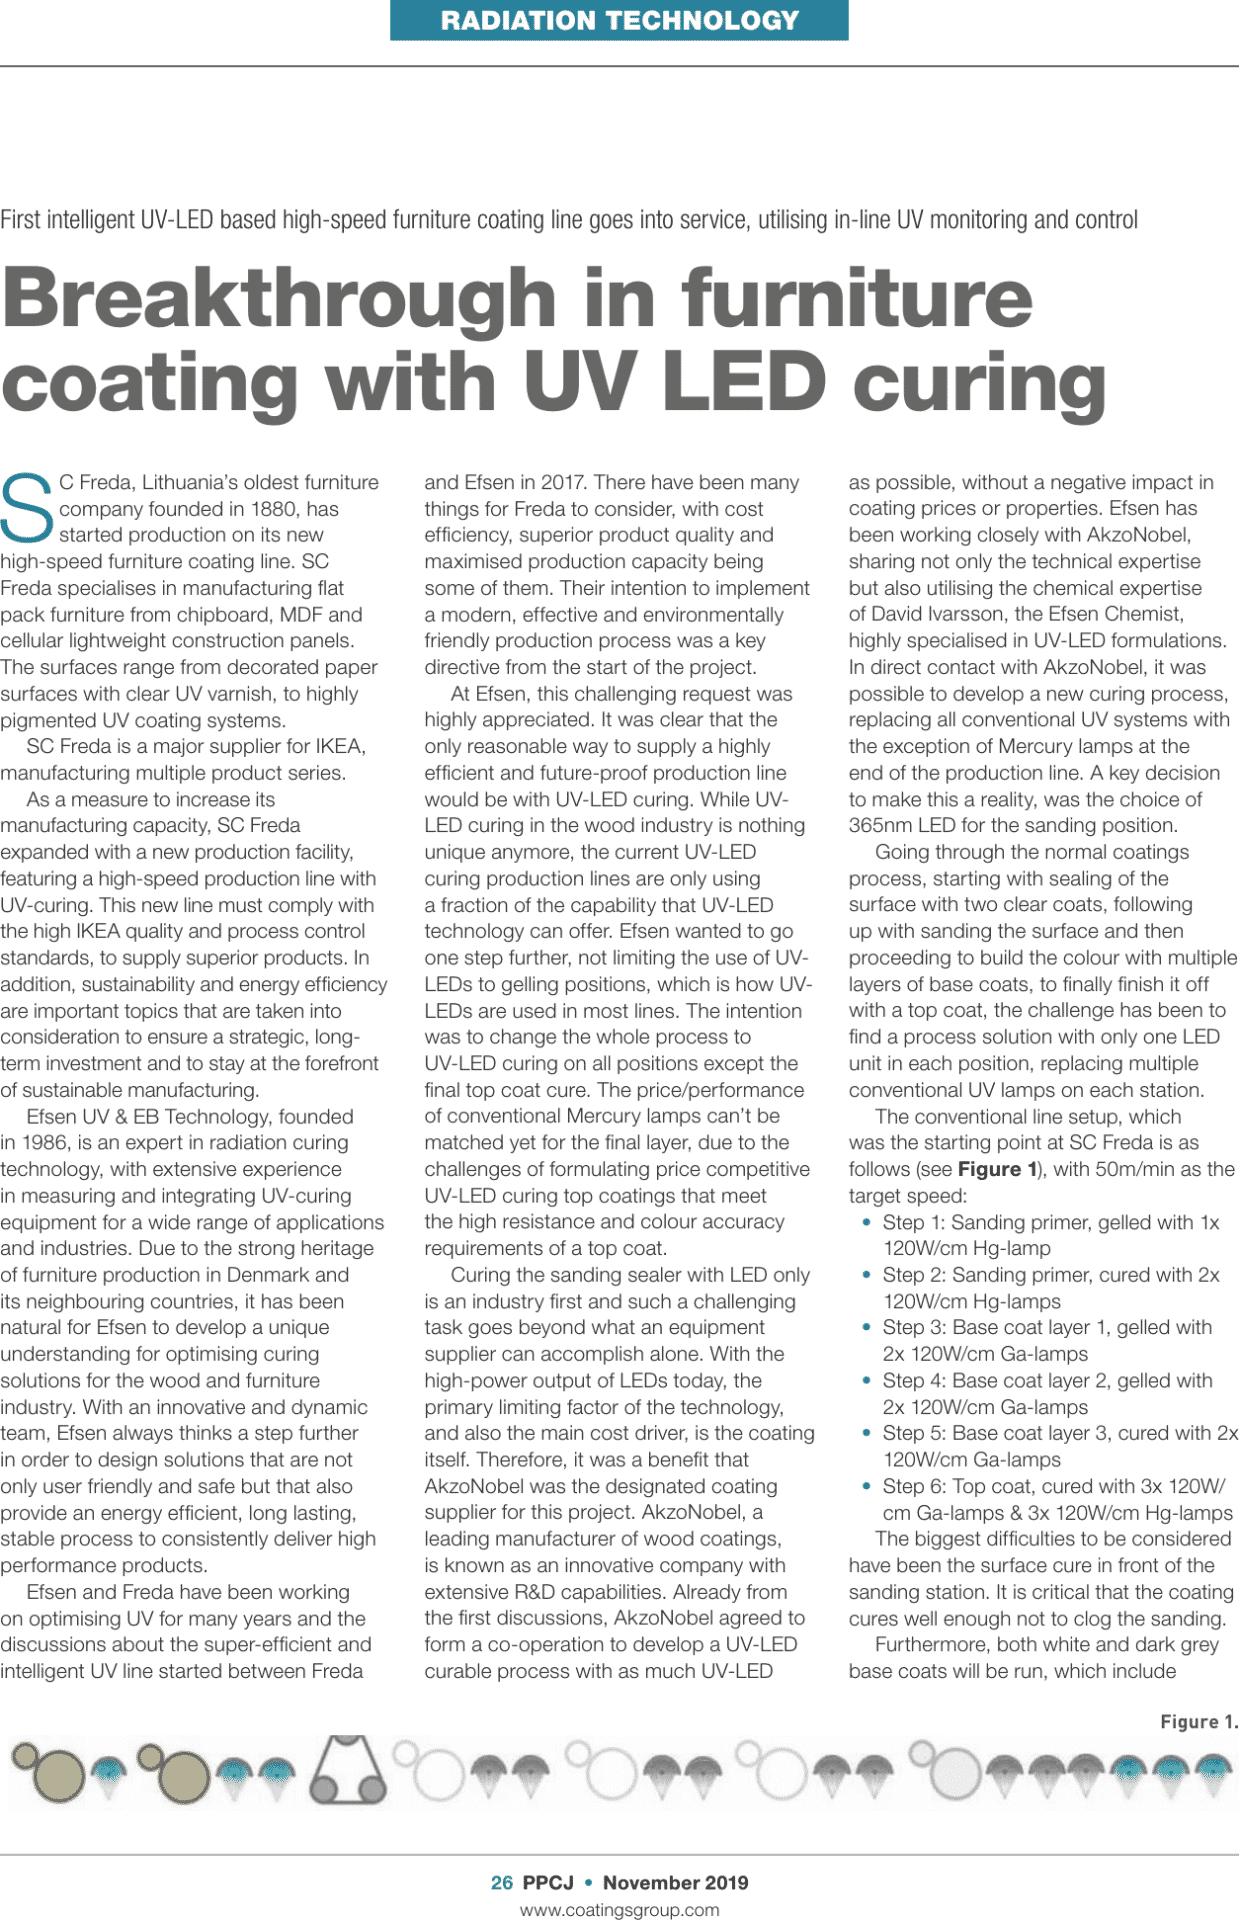 Breakthrough in furniture coating with UV LED curing_PPCJ_26